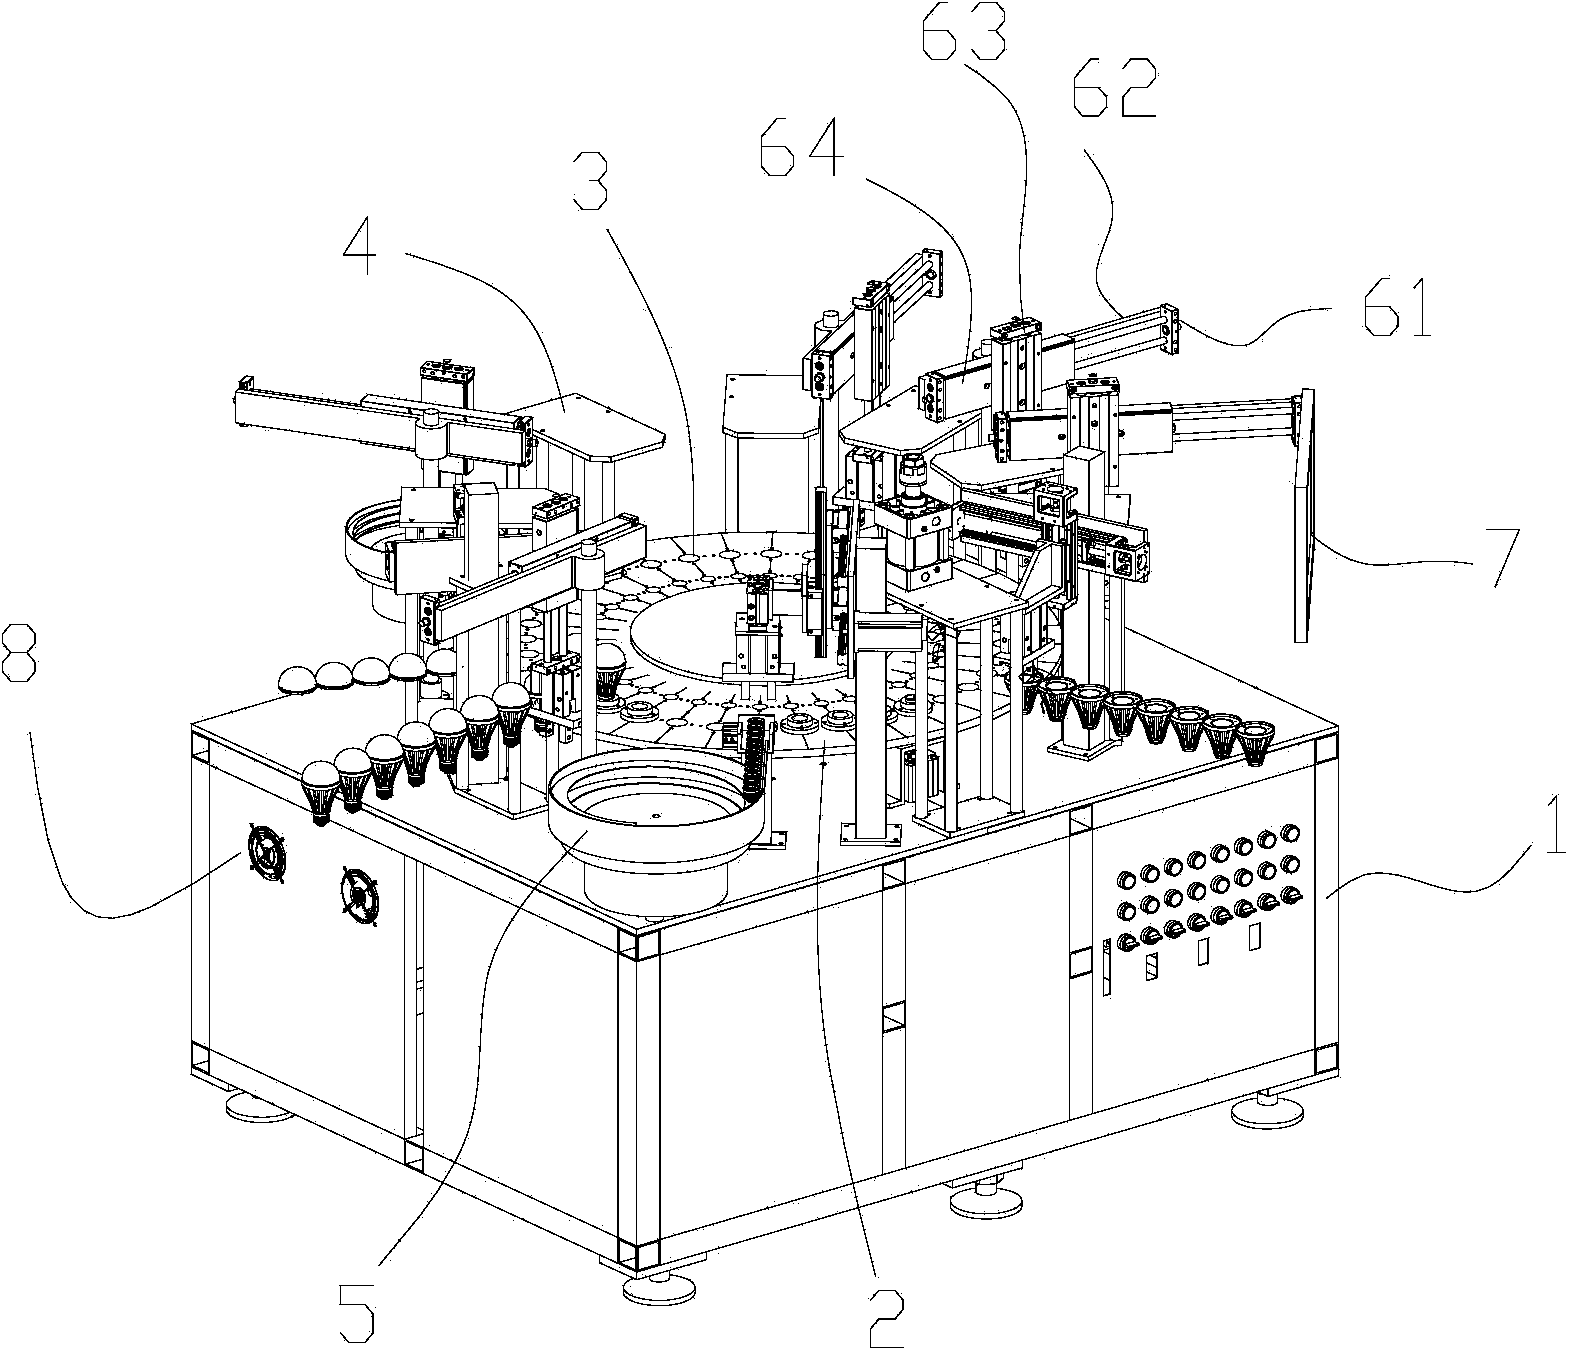 Multi-channel rotary table automatic assembly machine and method for producing LED (light-emitting diode) lamps